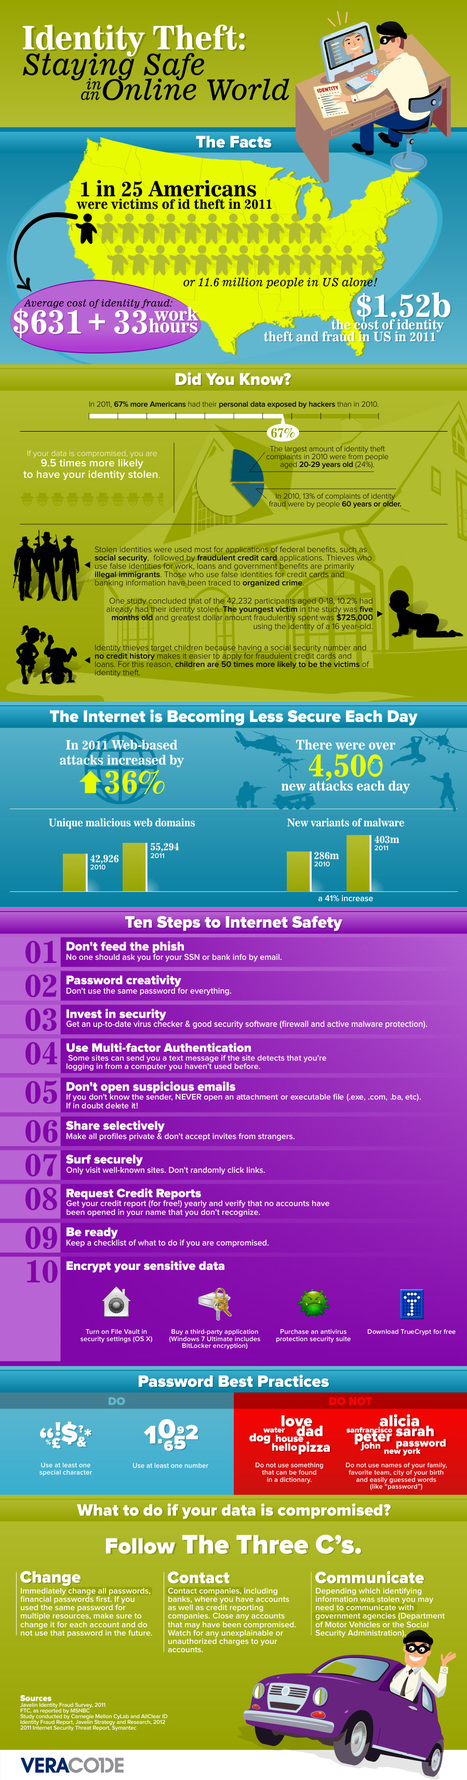 Identity Theft: Keeping Safe in an Online World [Infographic] | ICT Security-Sécurité PC et Internet | Scoop.it